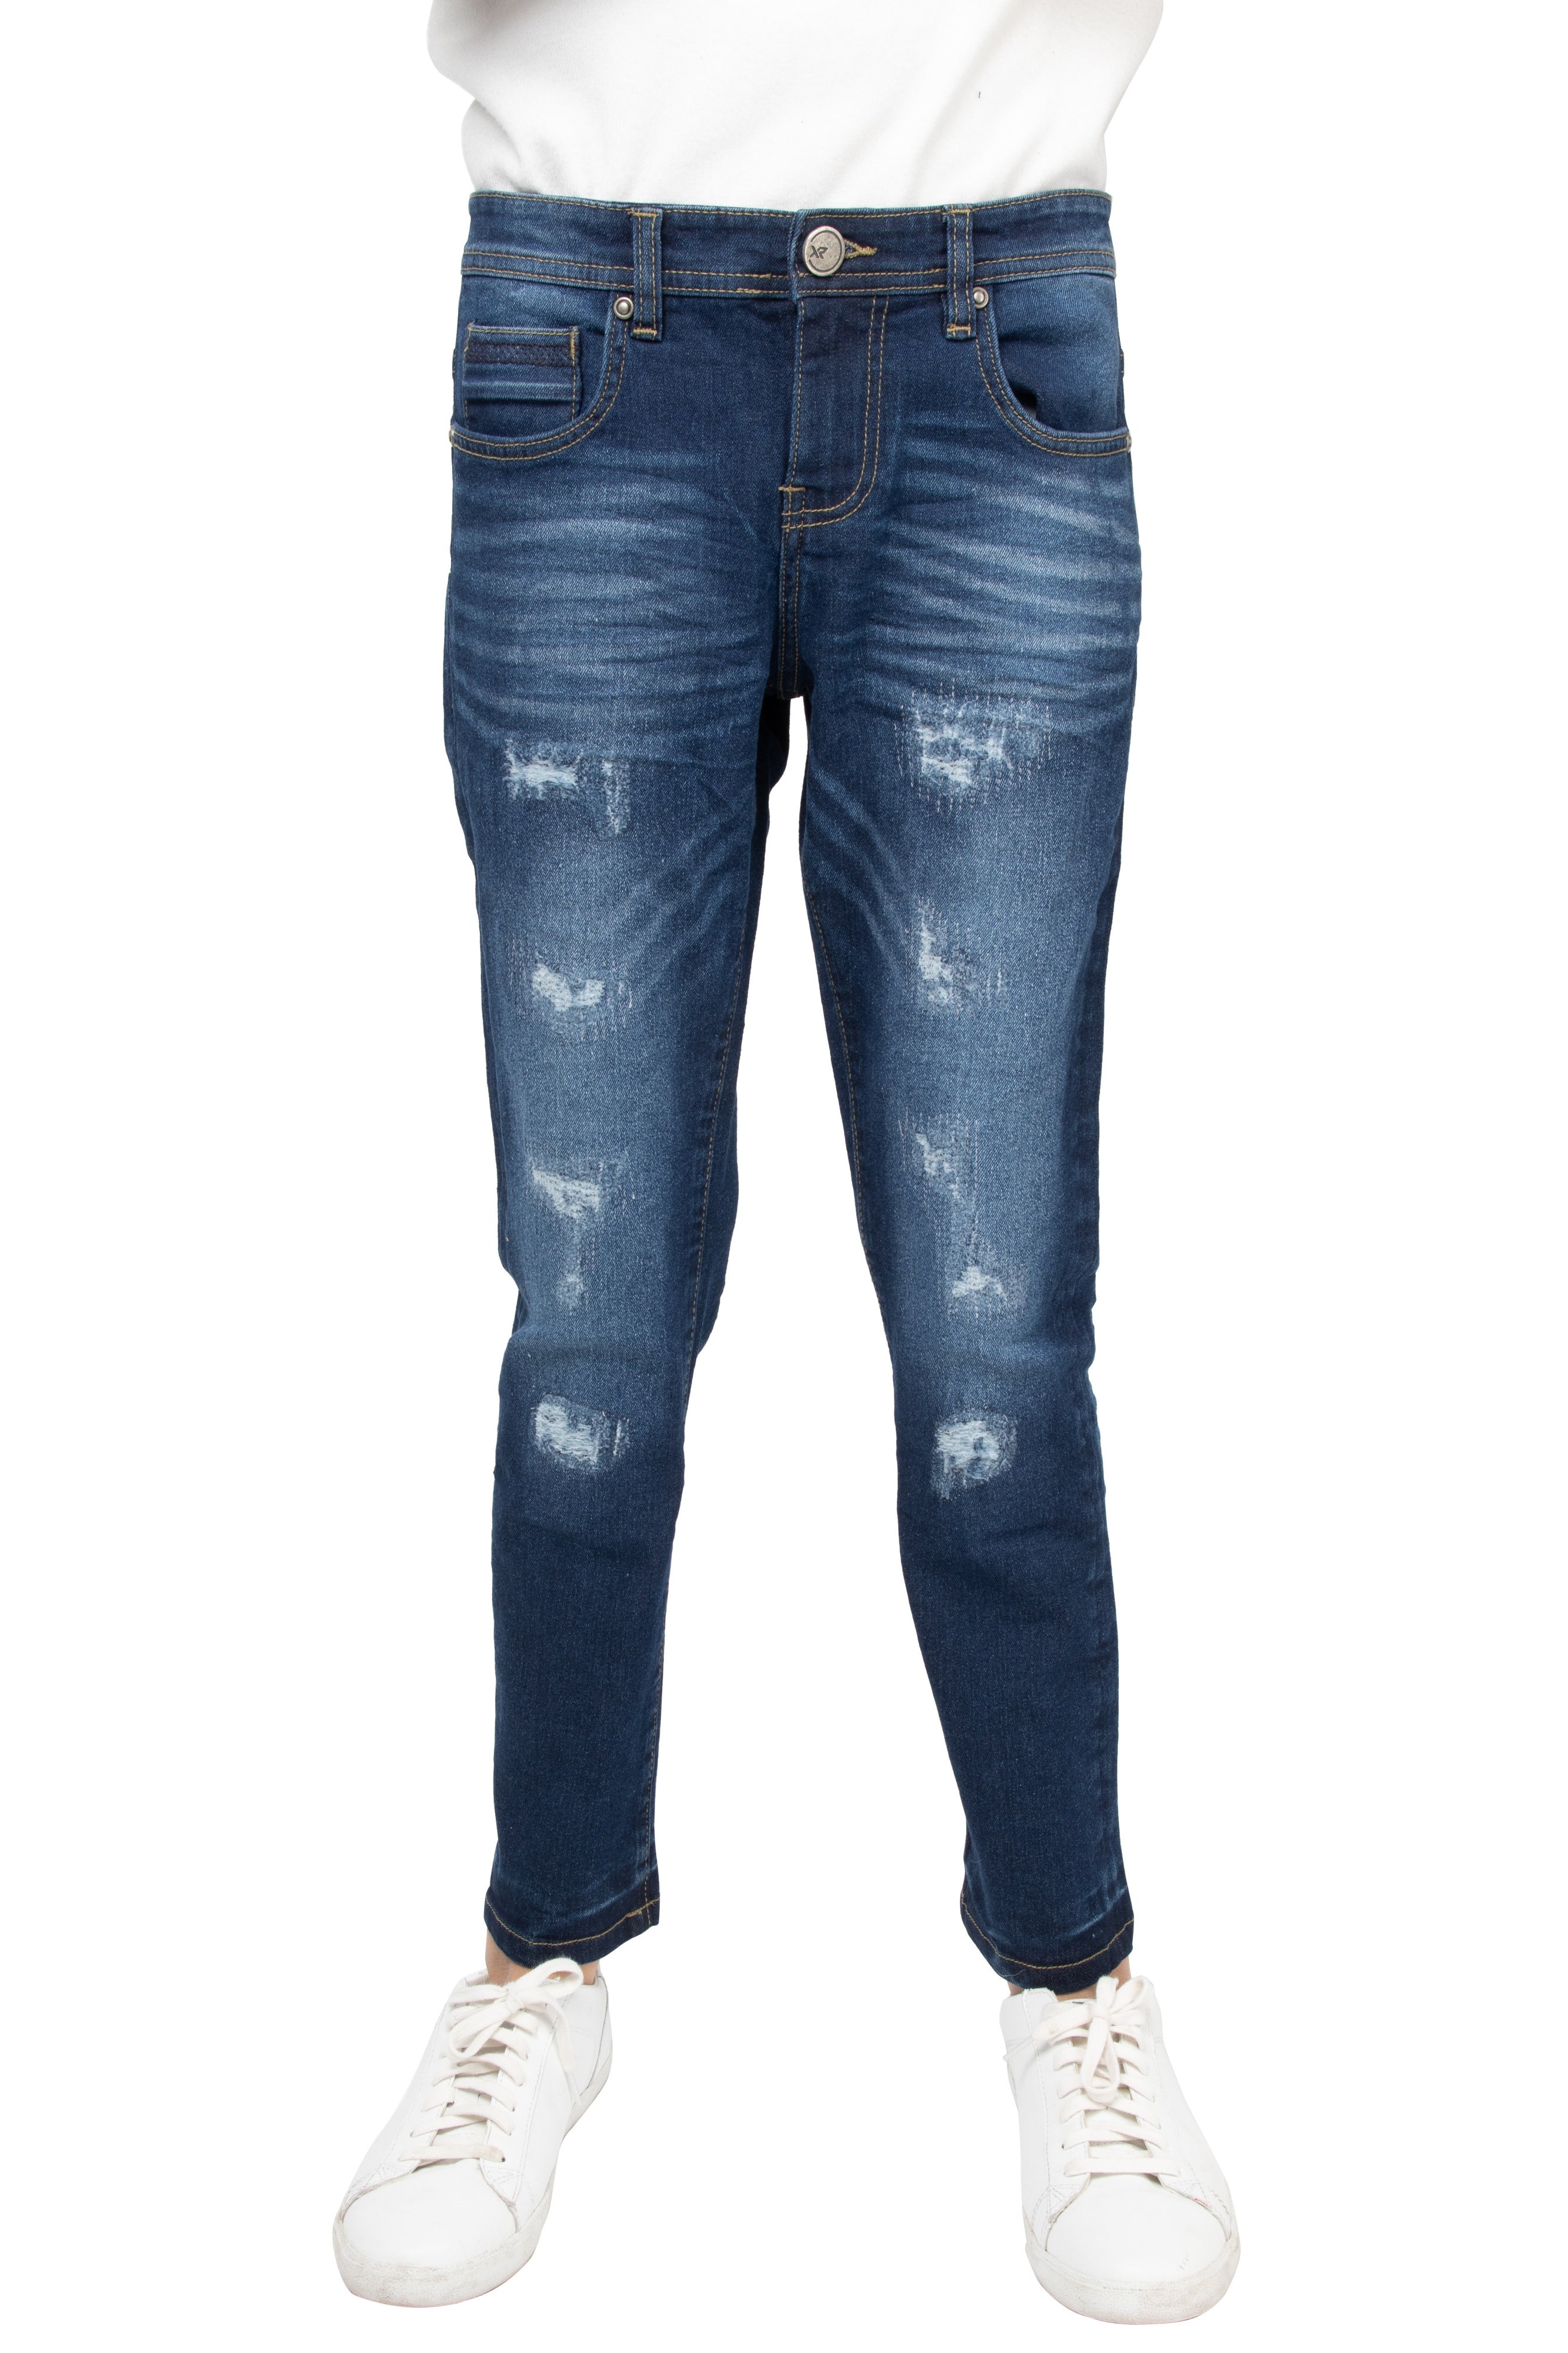 XRay Jeans Little Boys Slim Fit Distressed Ripped & Stitched Jean